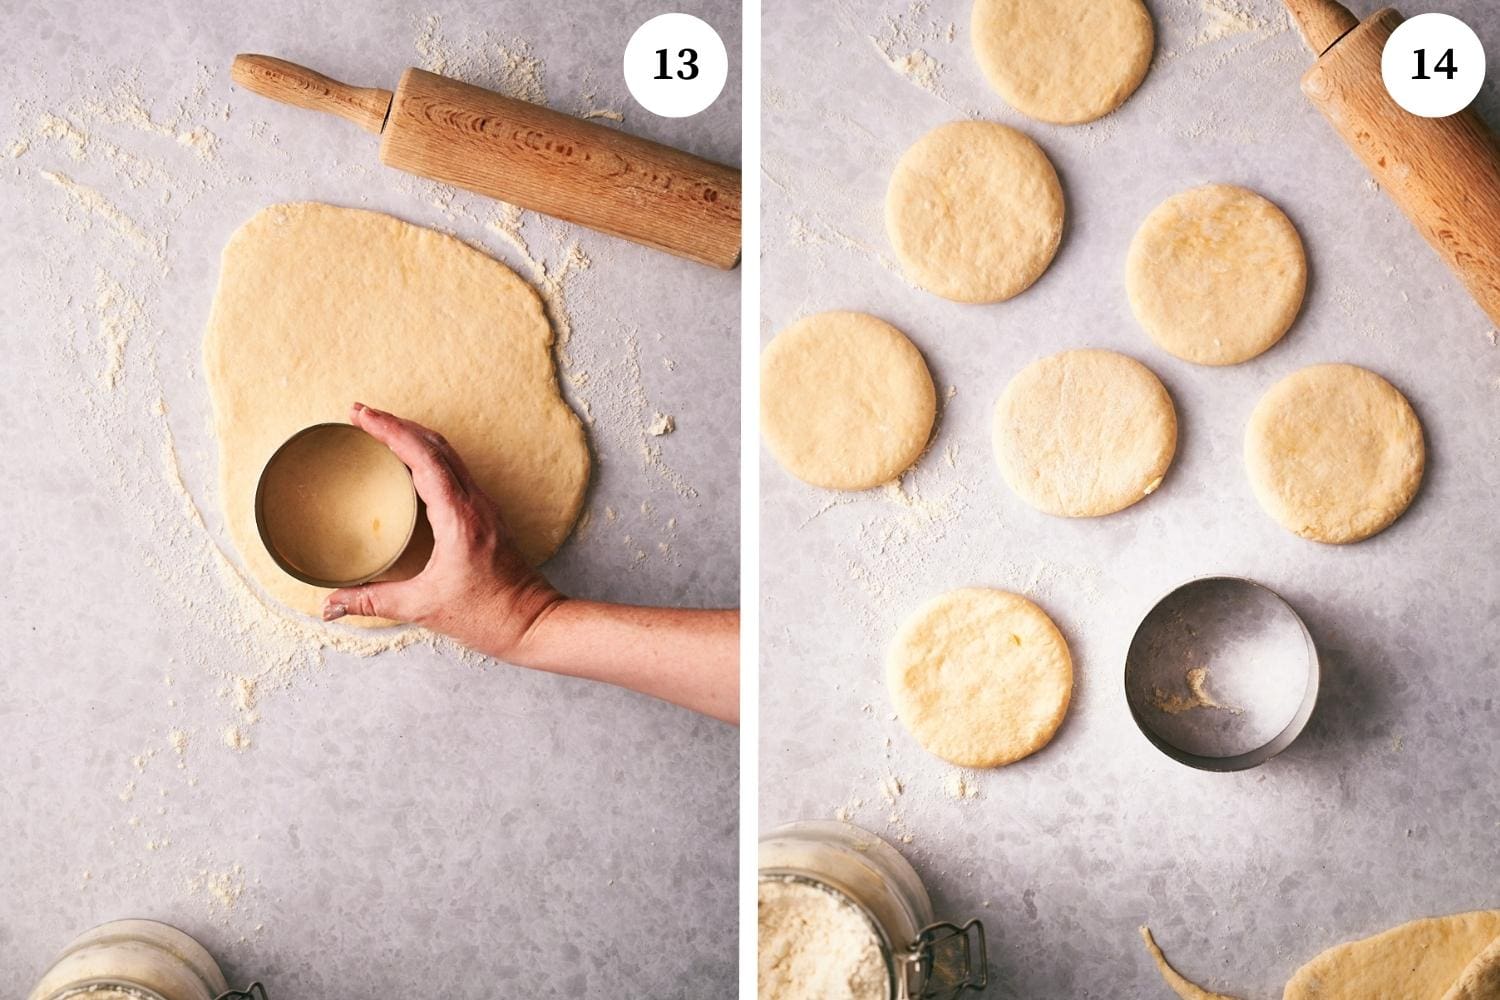 Process of making Tigelle Foccaccine Bread:  Use a round cookie cutter or the top of a round drinking glass that is 10 cm across to cut out the round tigelle shapes. 